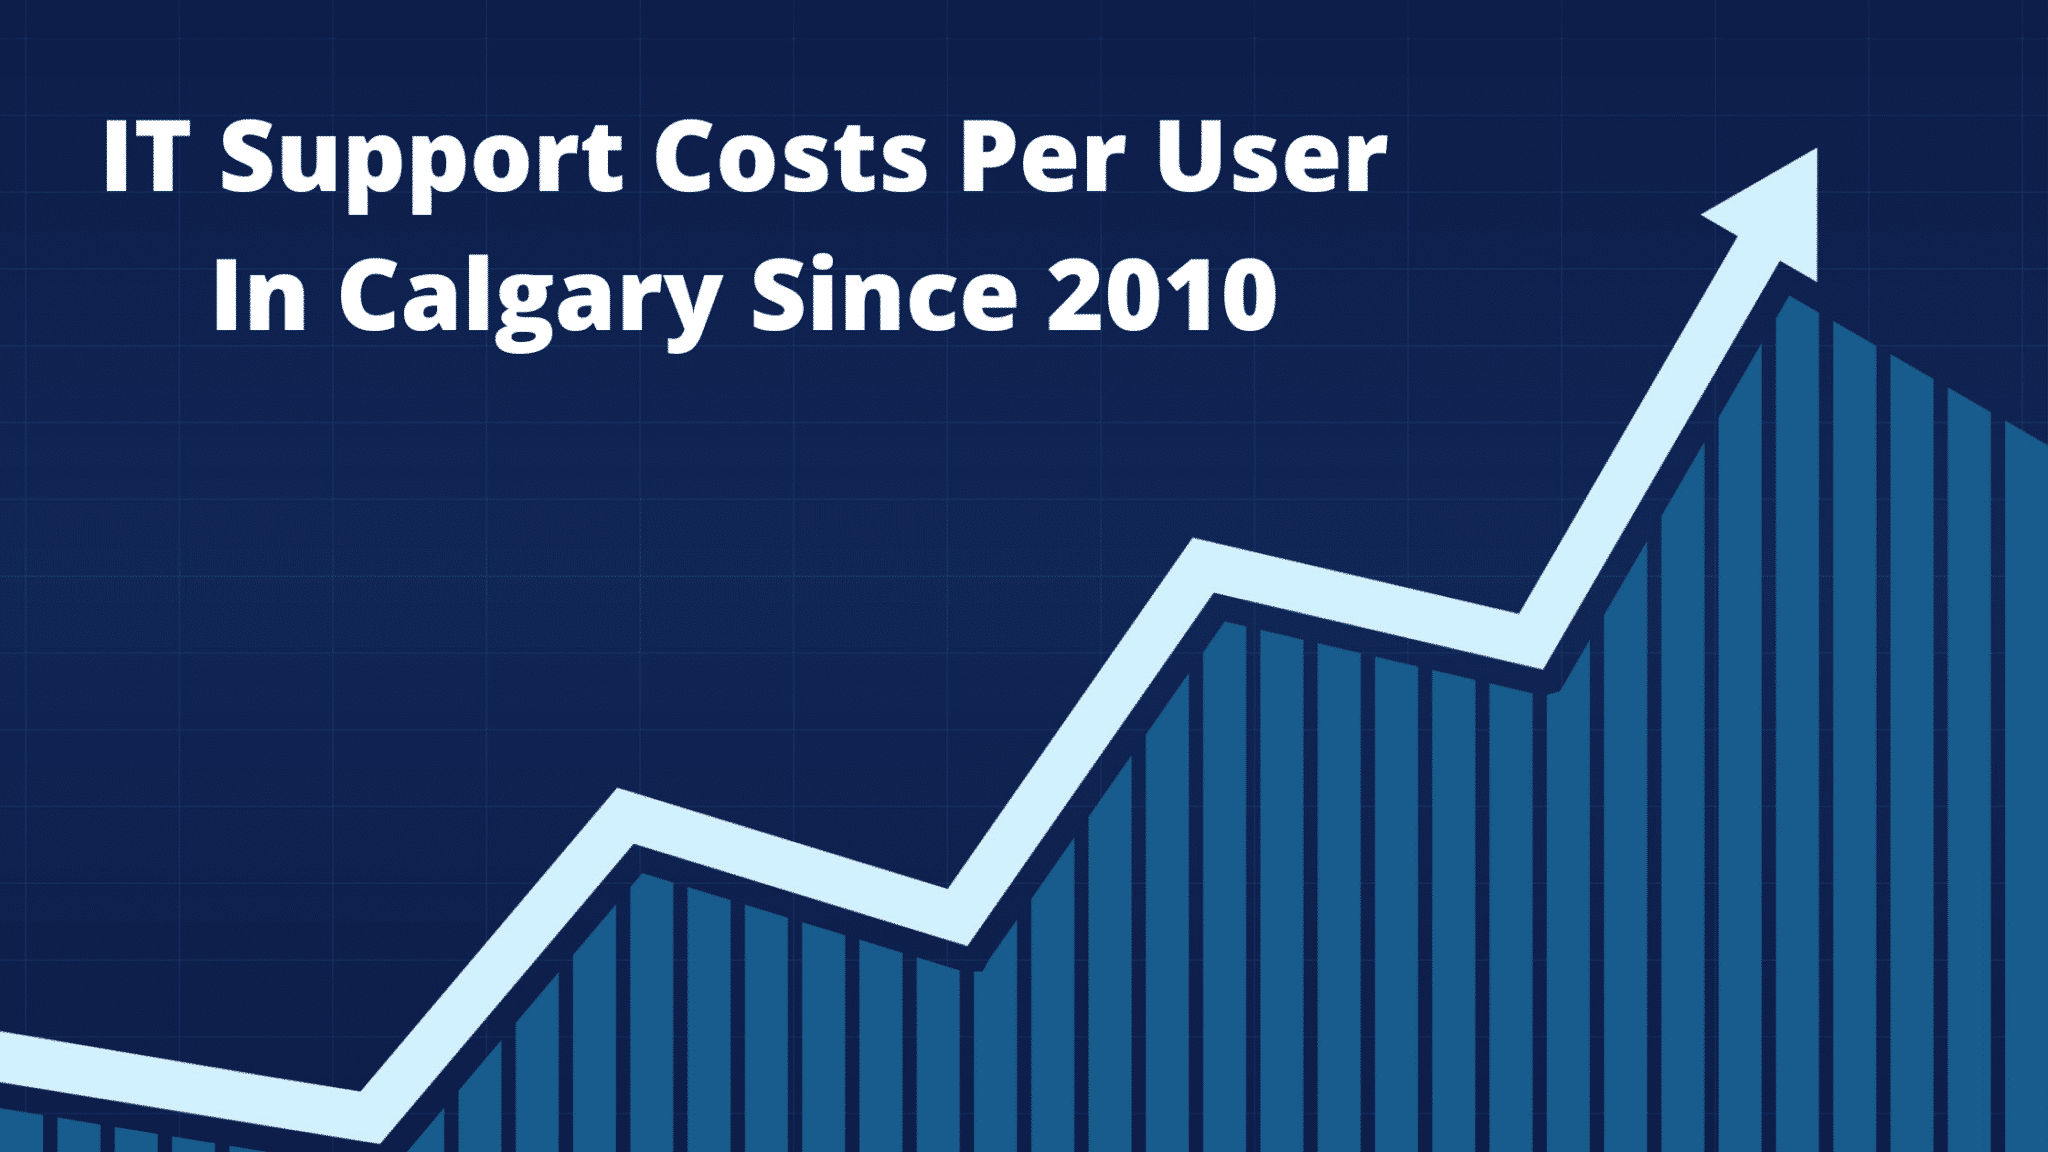 IT Support Costs Per User In Calgary Since 2010